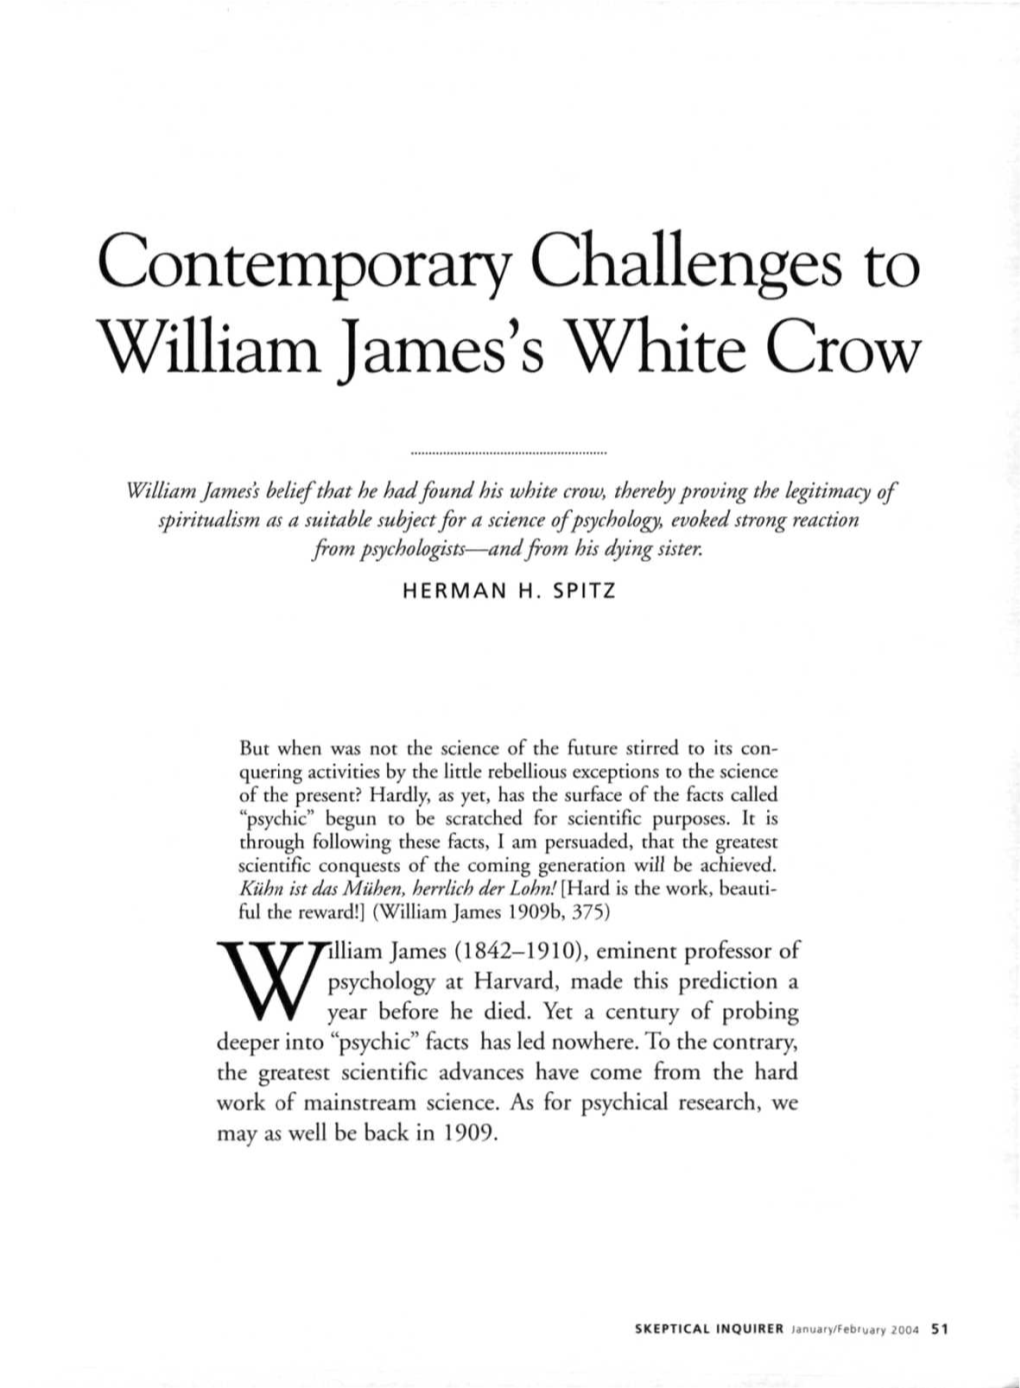 Contemporary Challenges to William James's White Crow